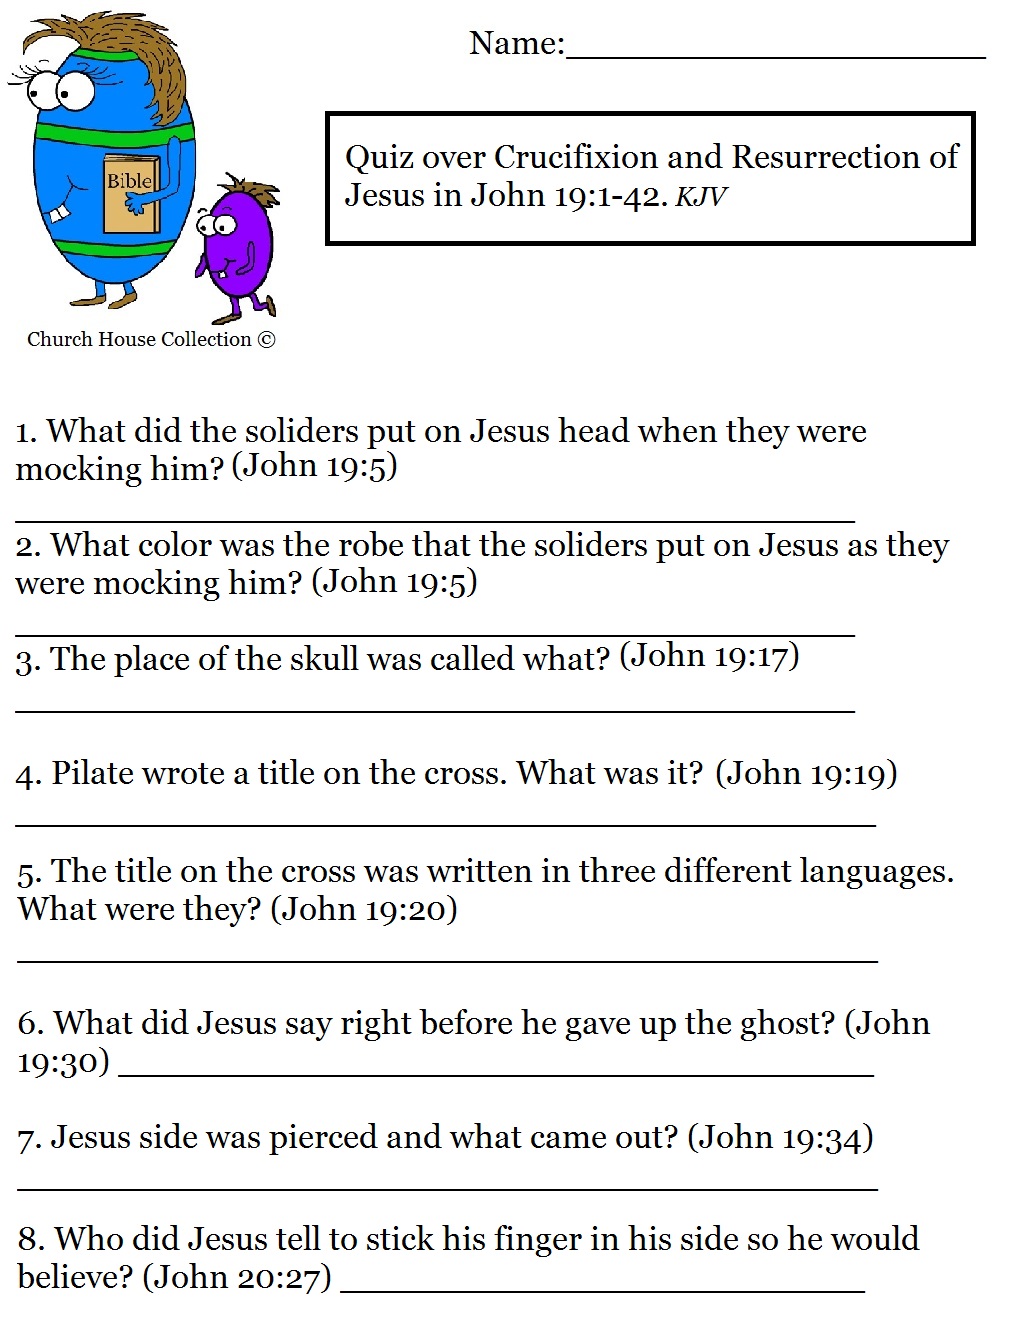 32 Fun Bible Trivia Questions | KittyBabyLove.com